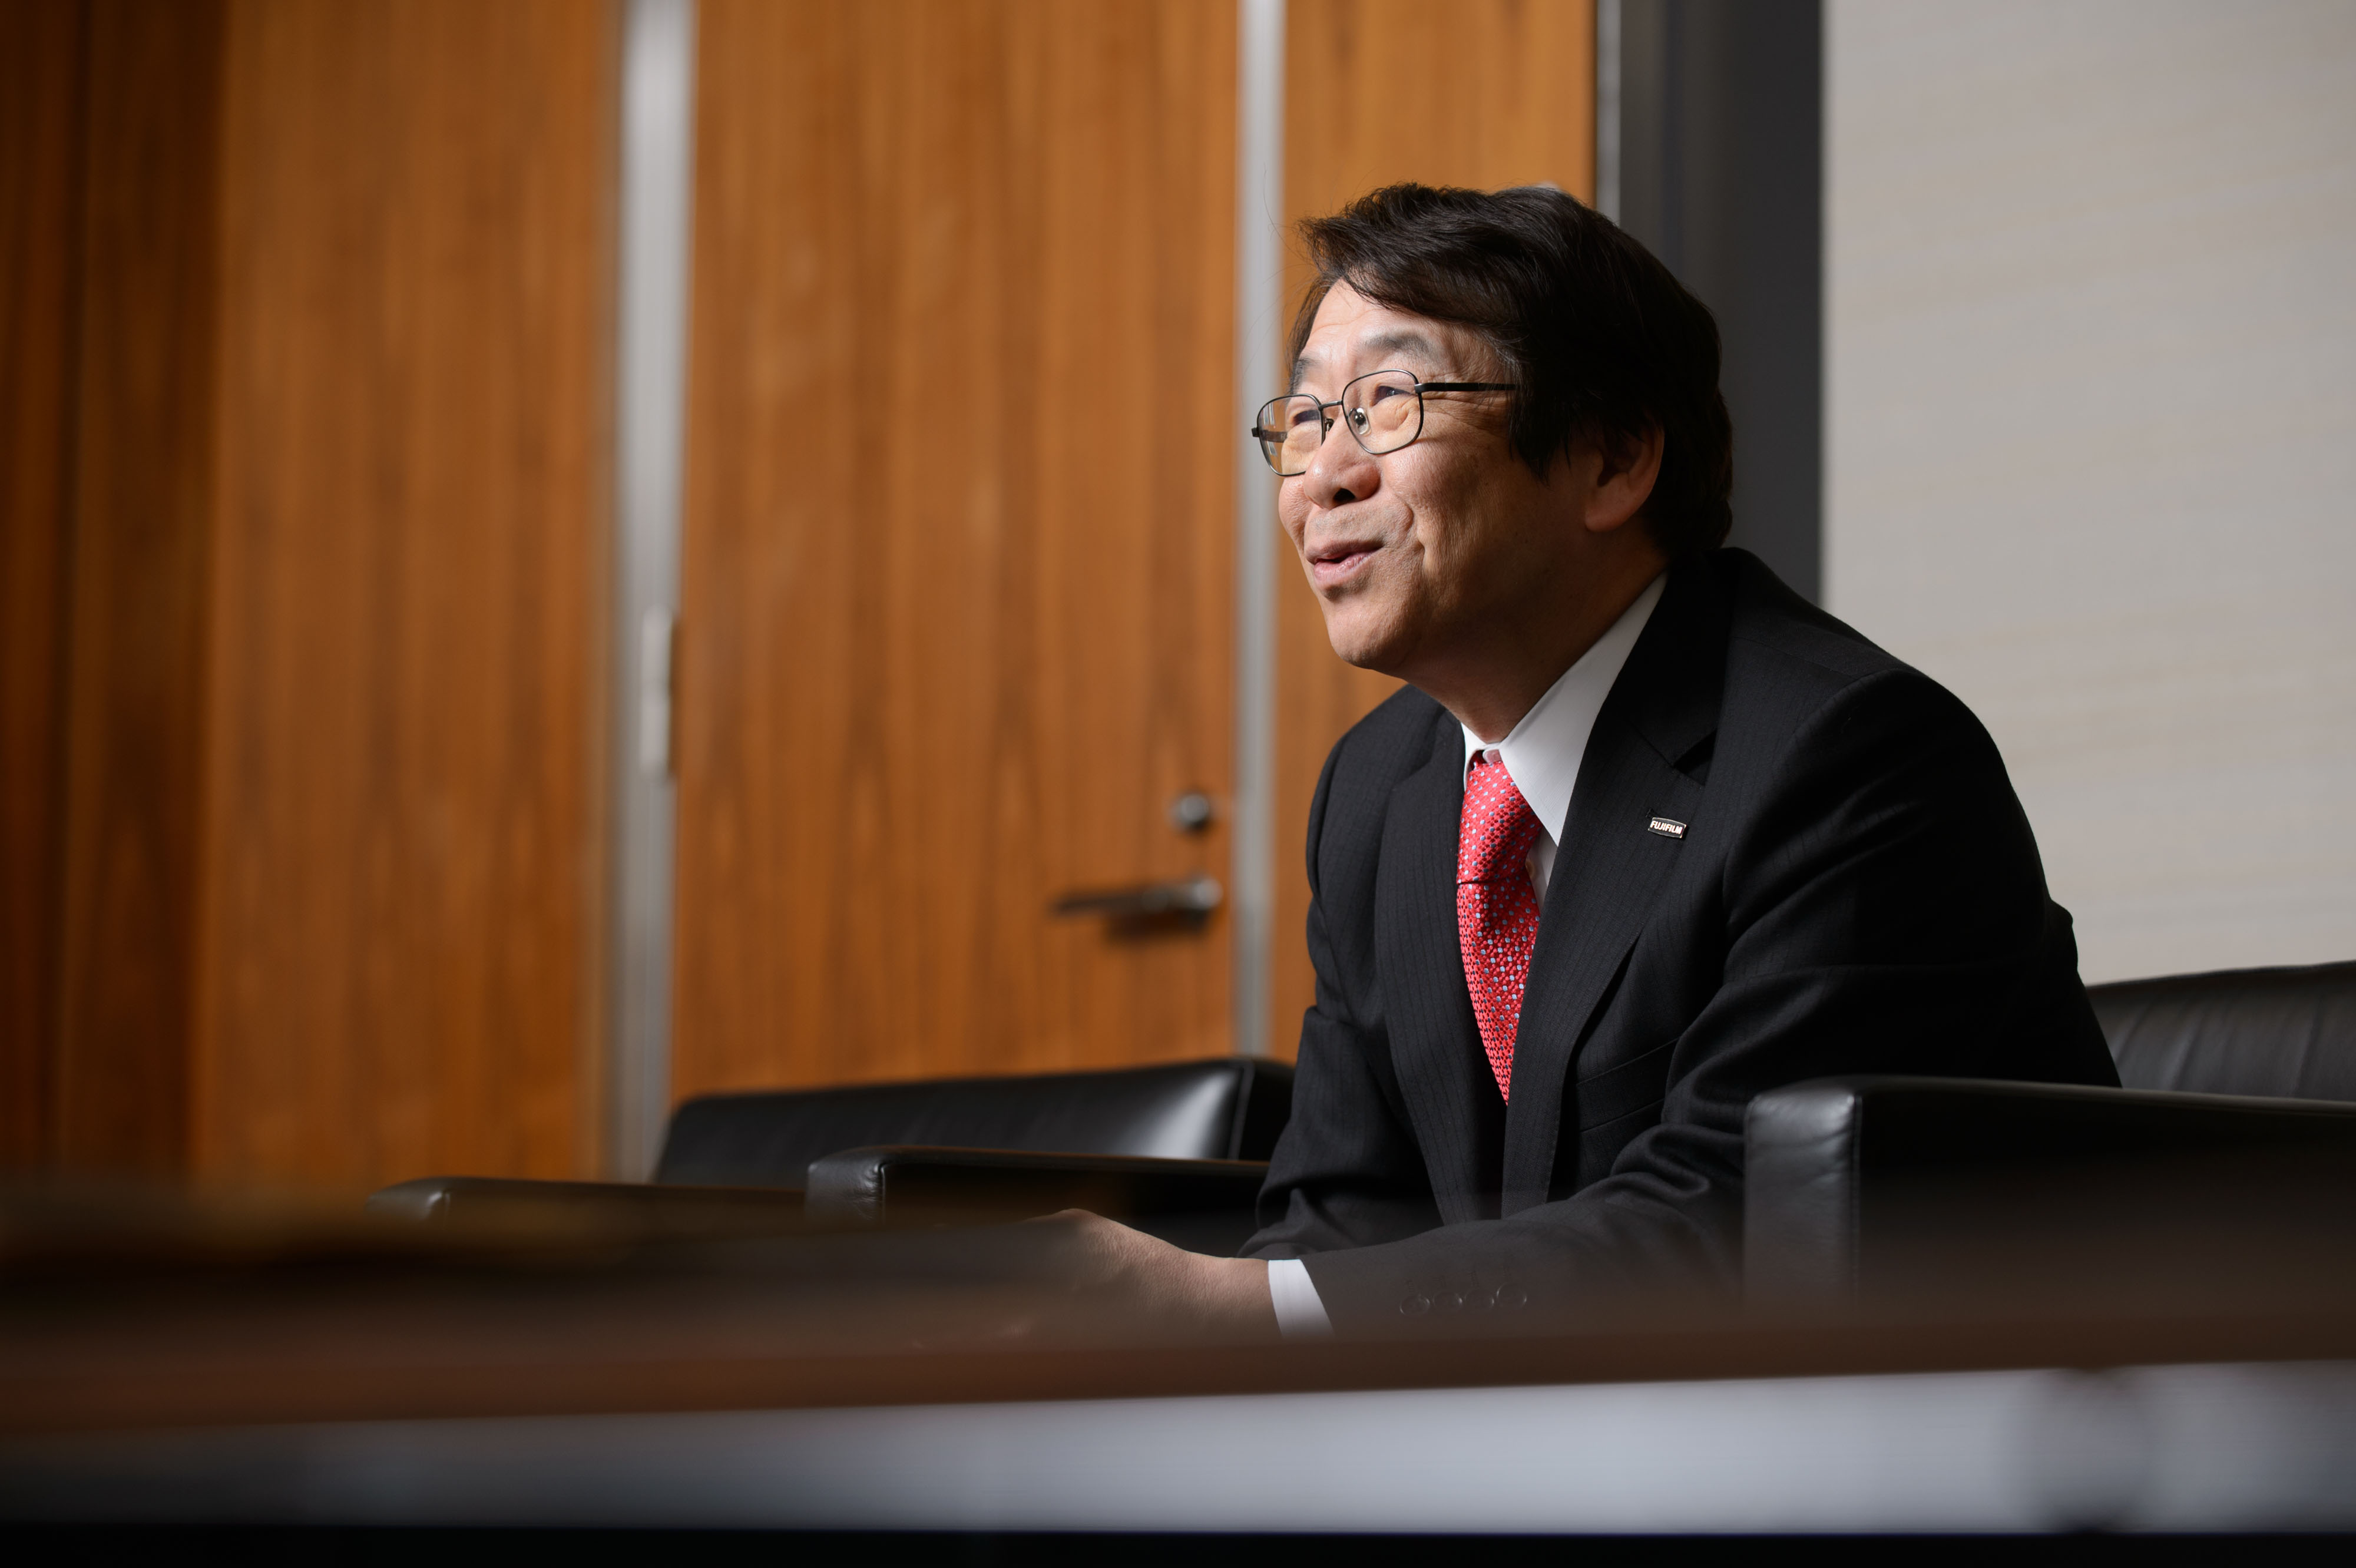 Kenji Sukeno, president of Fujifilm Holdings Corp., is interviewed in Tokyo on Thursday. Fujifilm is targeting 20 percent operating margins in its drug operations and aims to make the business profitable in the fiscal year starting April 2018, he said. | BLOOMBERG